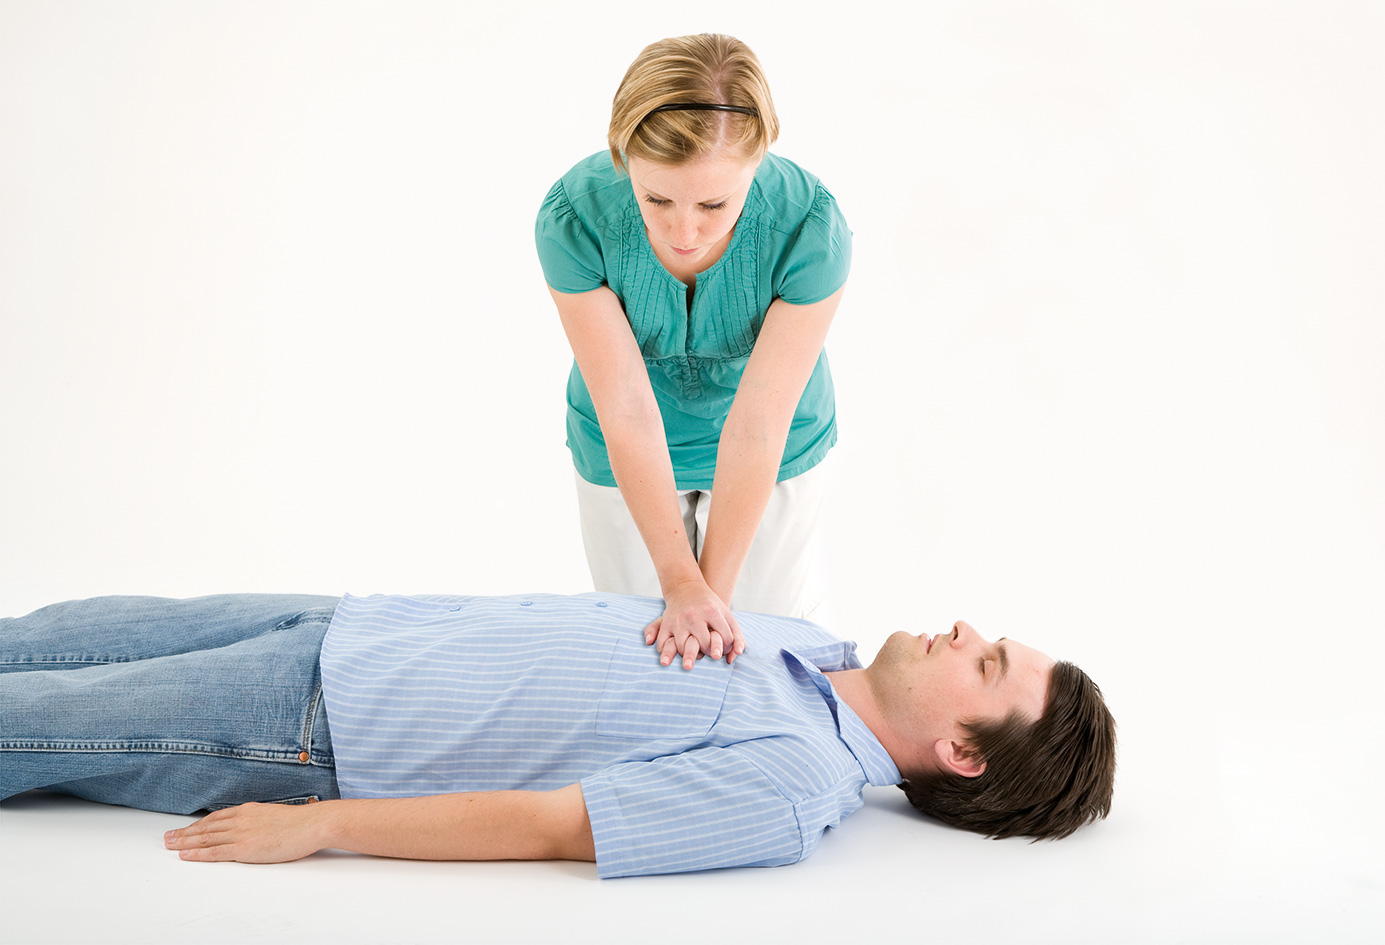 Why CPR is important to save someones life according to AquaMobile